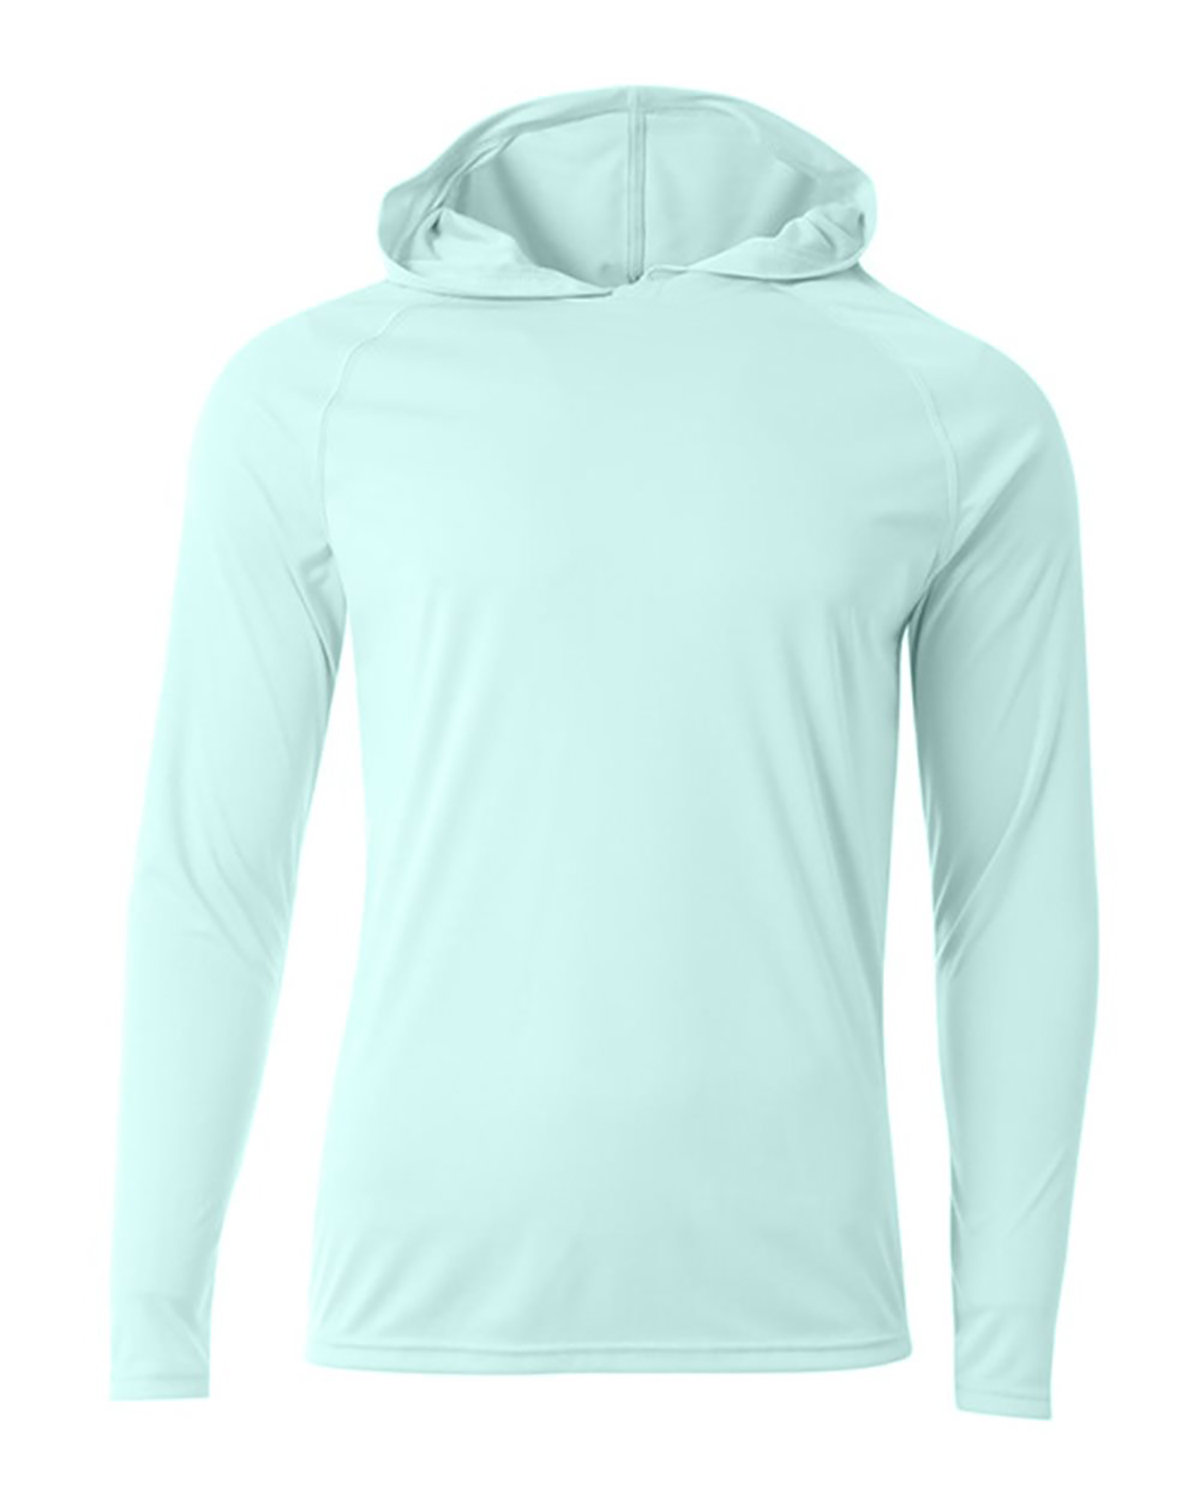 A4 N3409 - Men's Cooling Performance Long-Sleeve Hooded ...